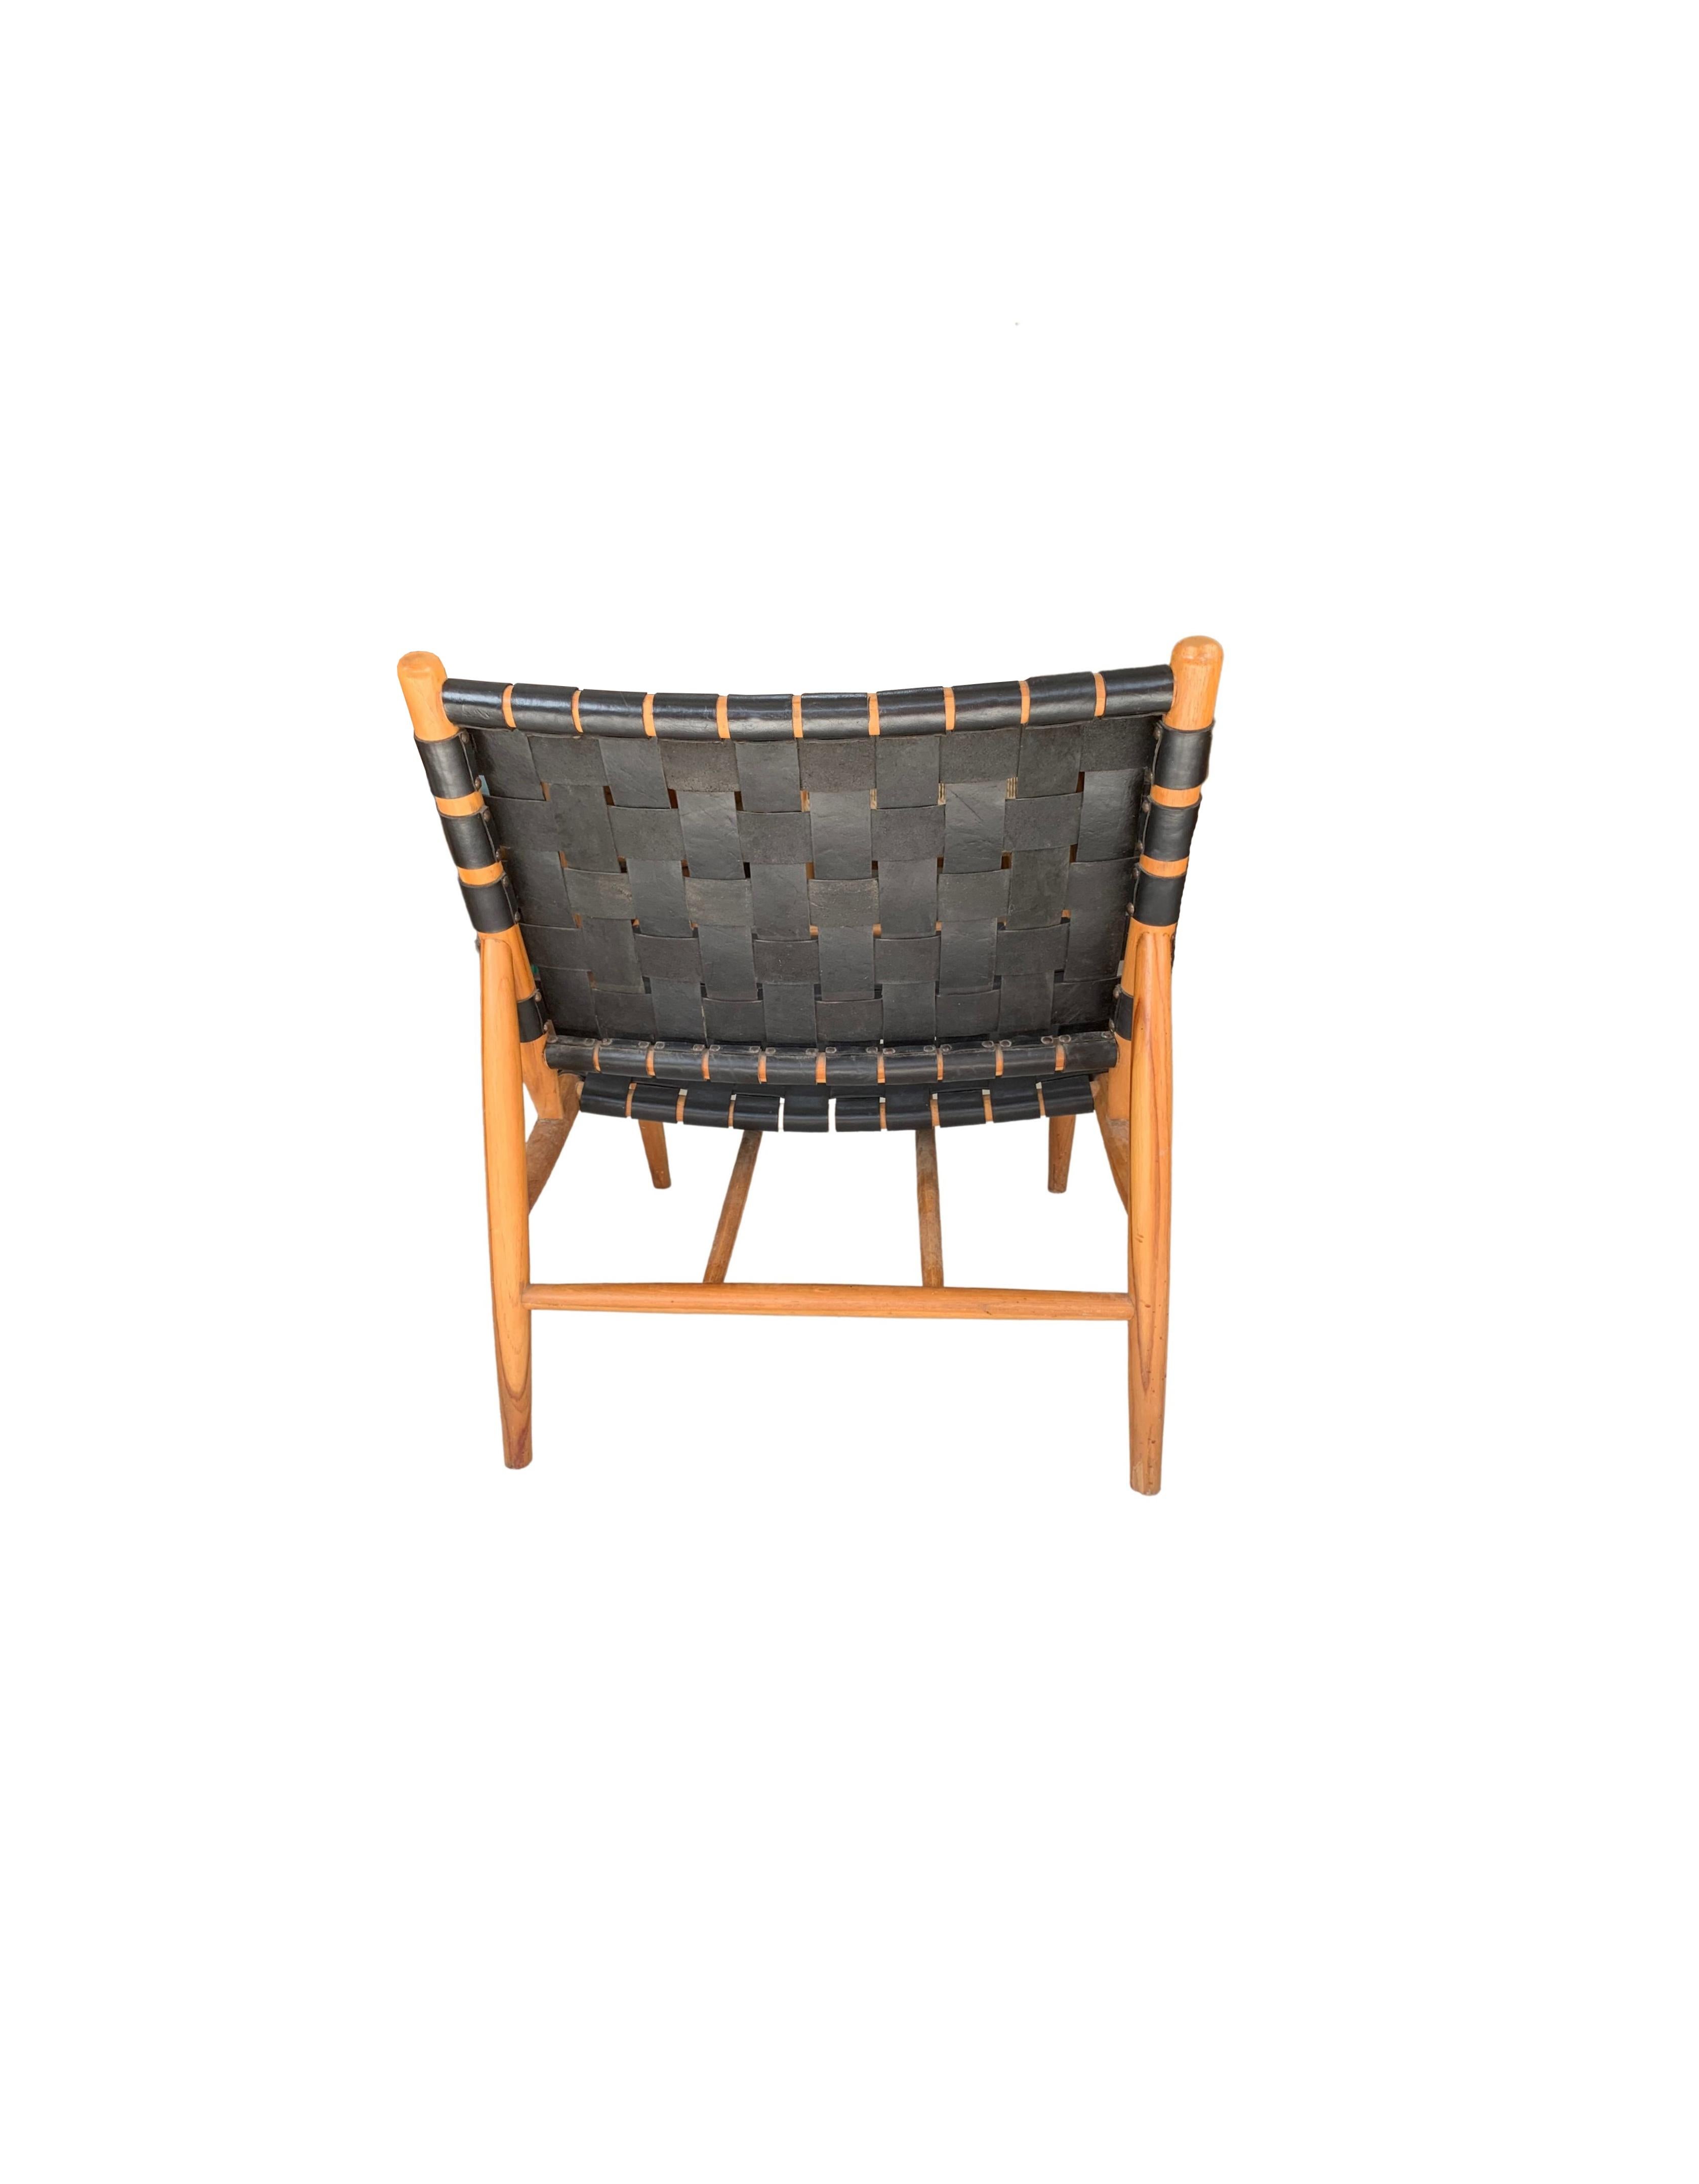 Hand-Crafted Teak Wood Framed Lounge Chair, with Black Woven Leather Seat 